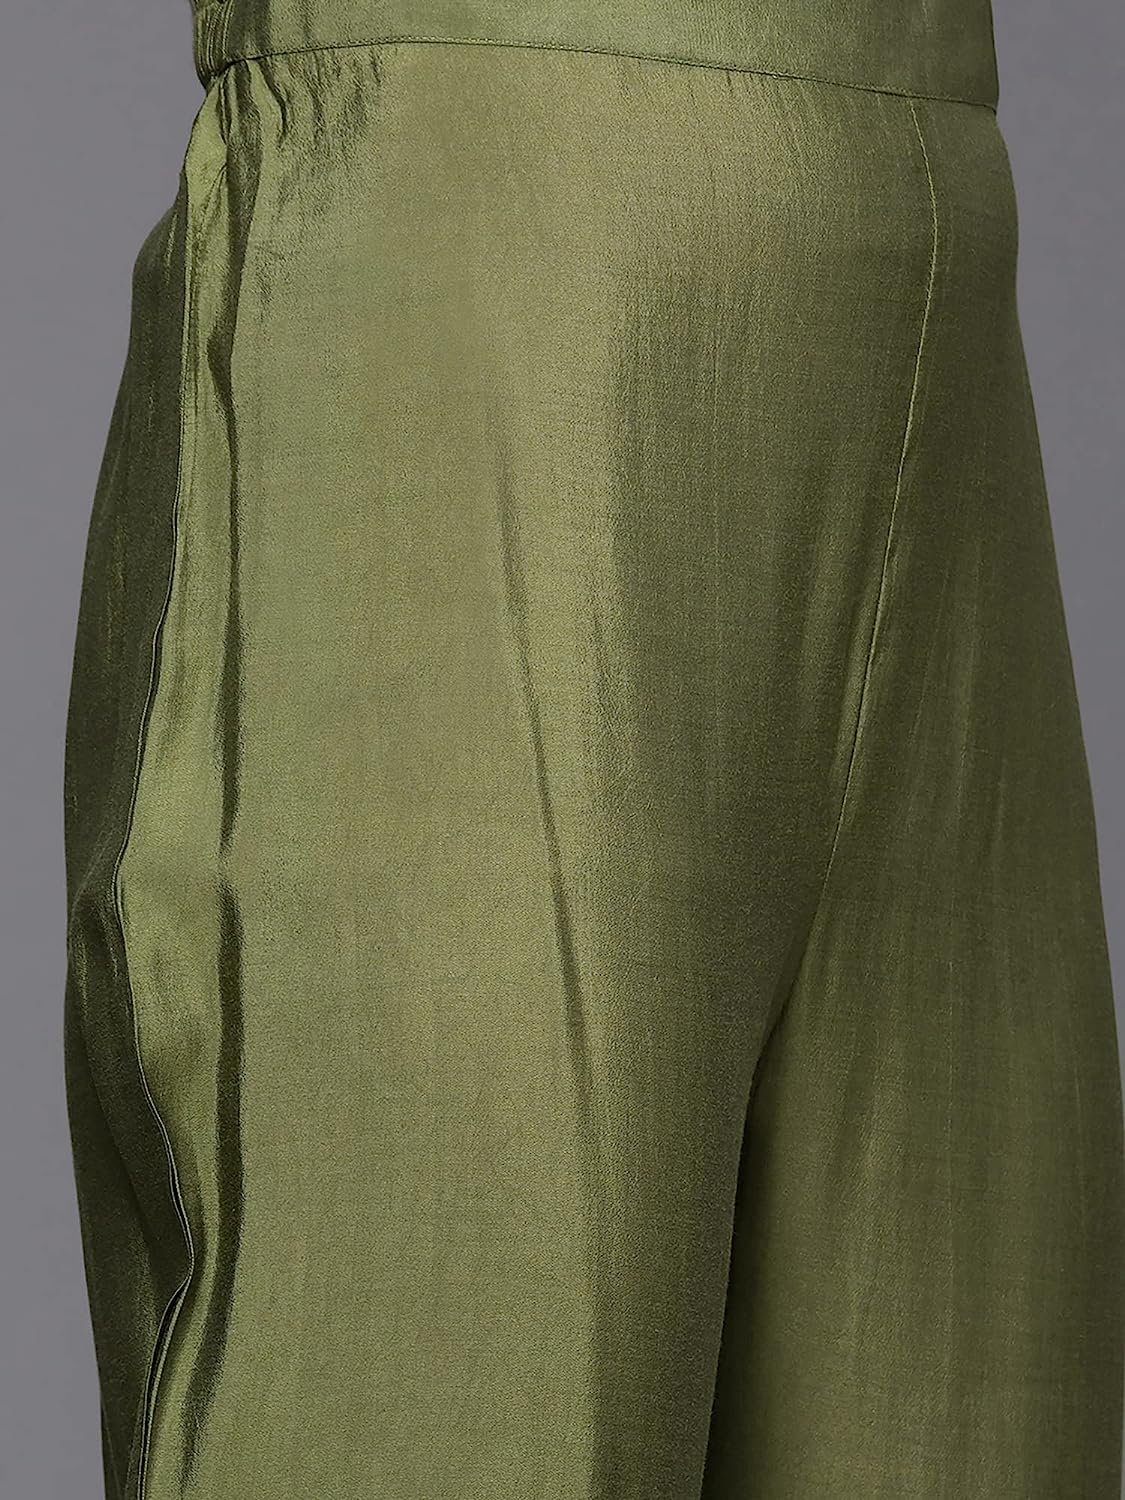 Green Embroidered Straight Ladies Kurta Trousers With Dupatta Set